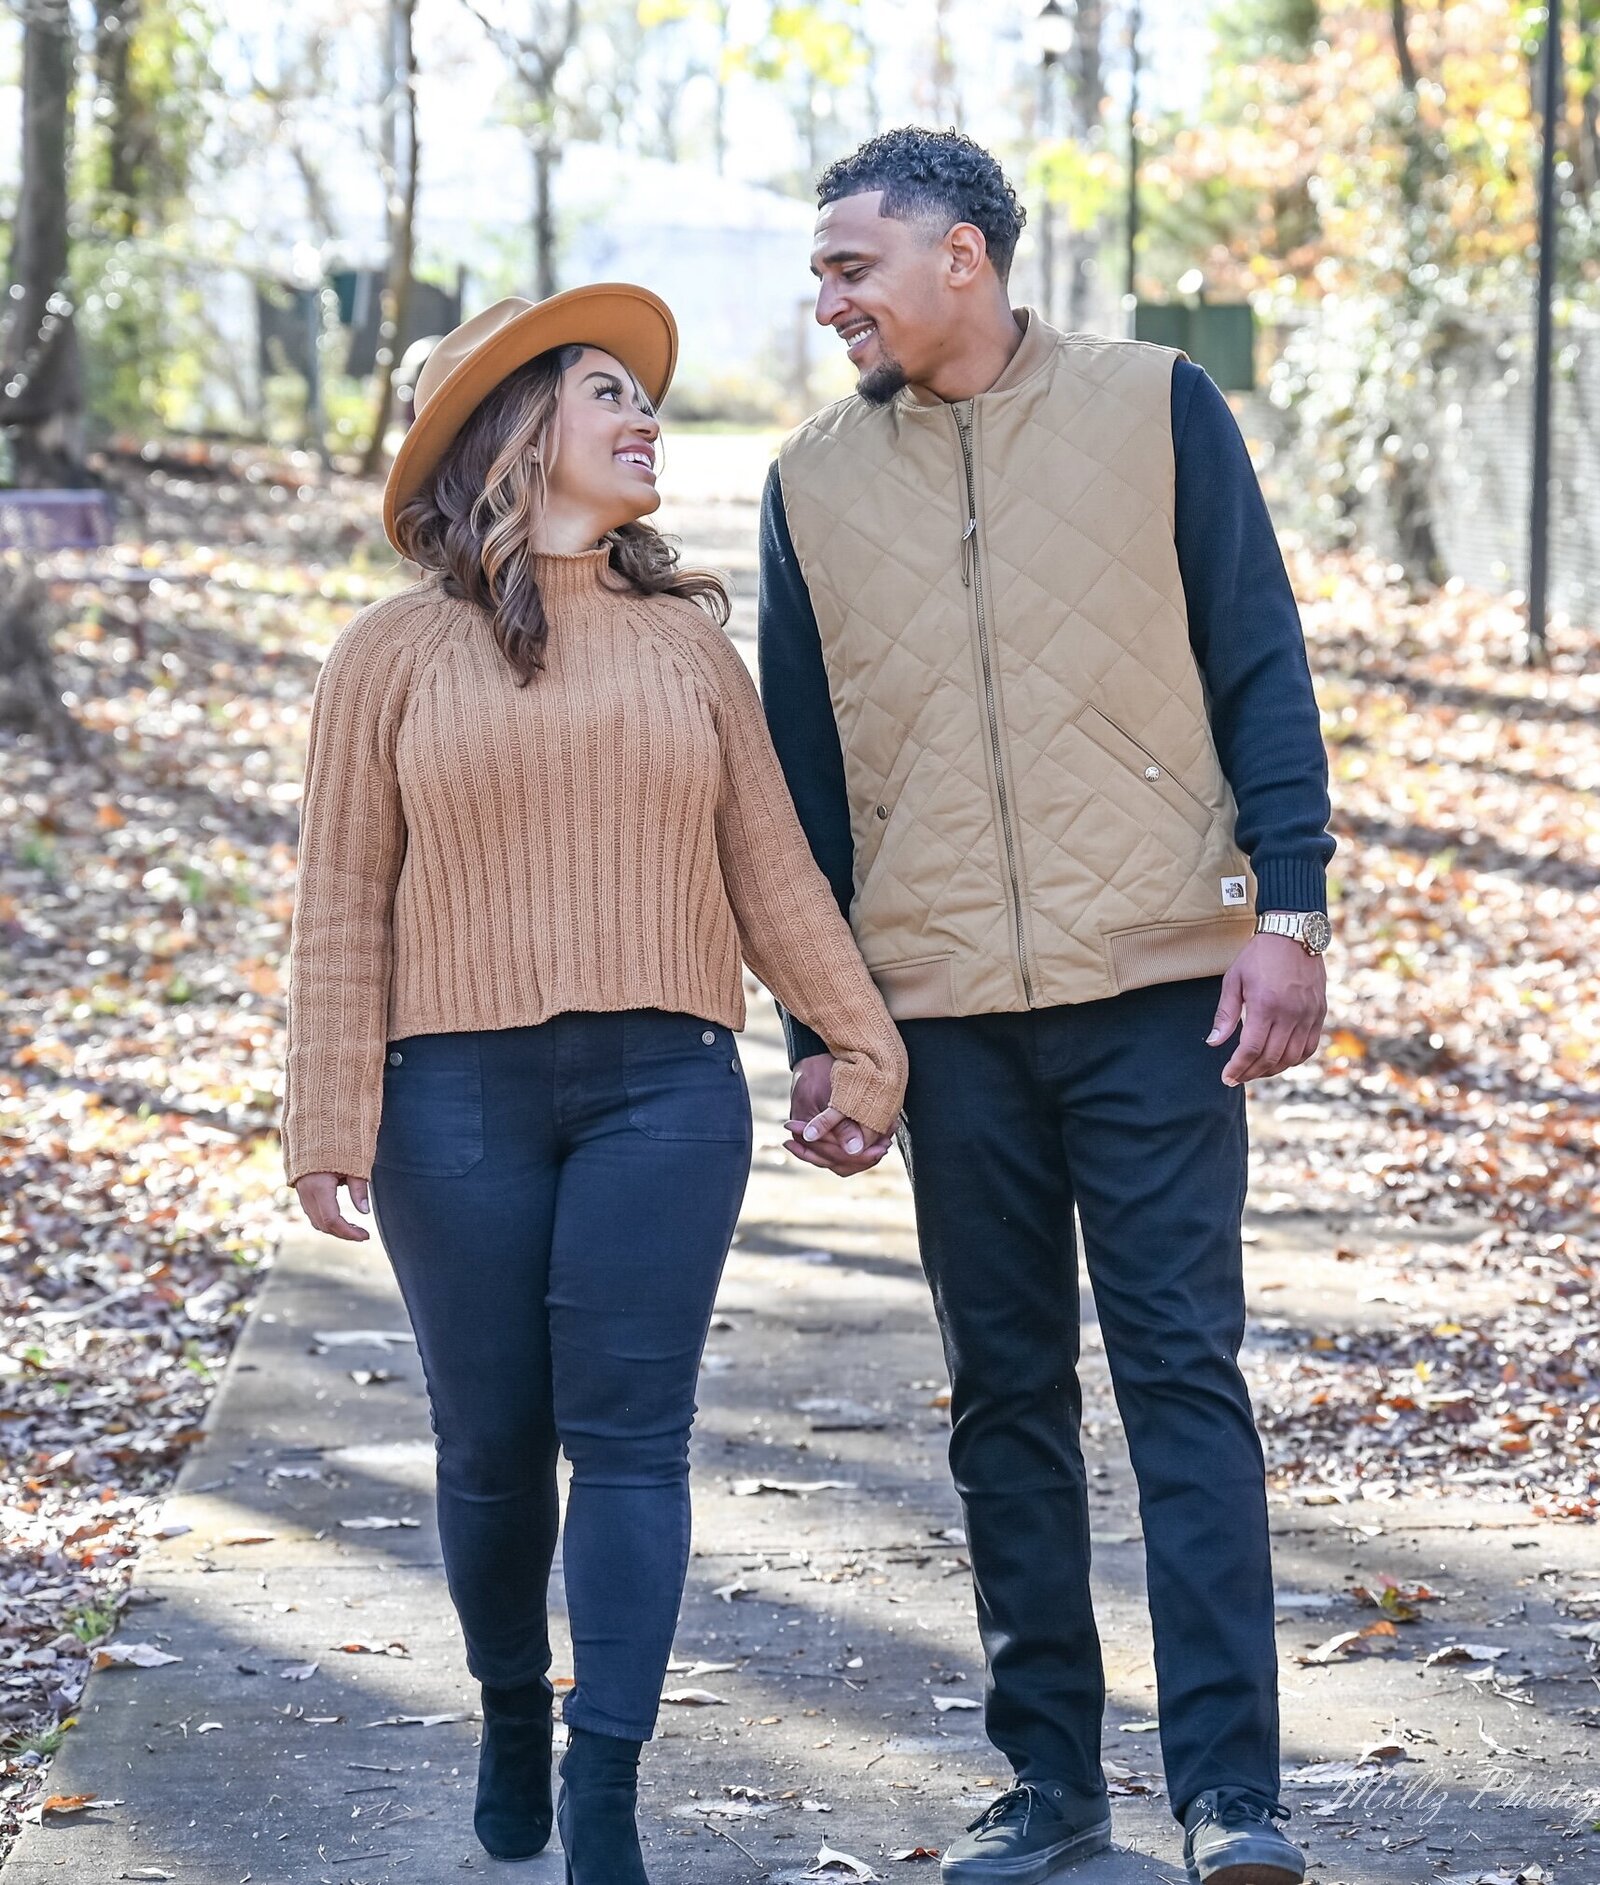 woman in a hat holding hands with a man walking through the woods in the fall photographed by Millz Photography in Greenville, SC